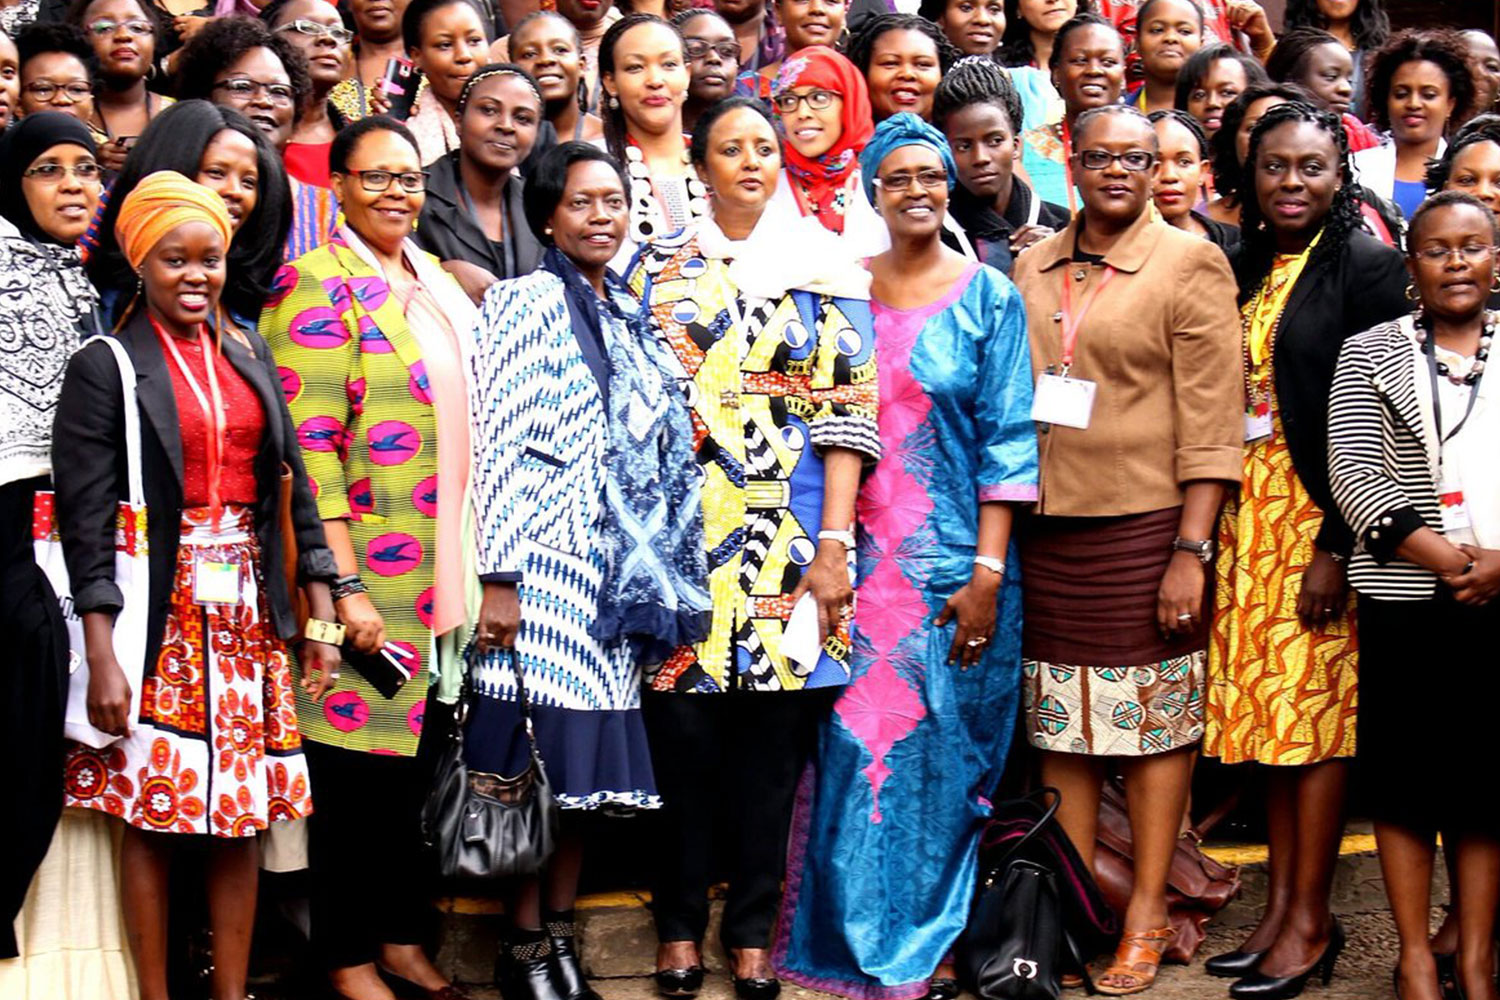 argumentative essay about african countries should encourage women's leadership